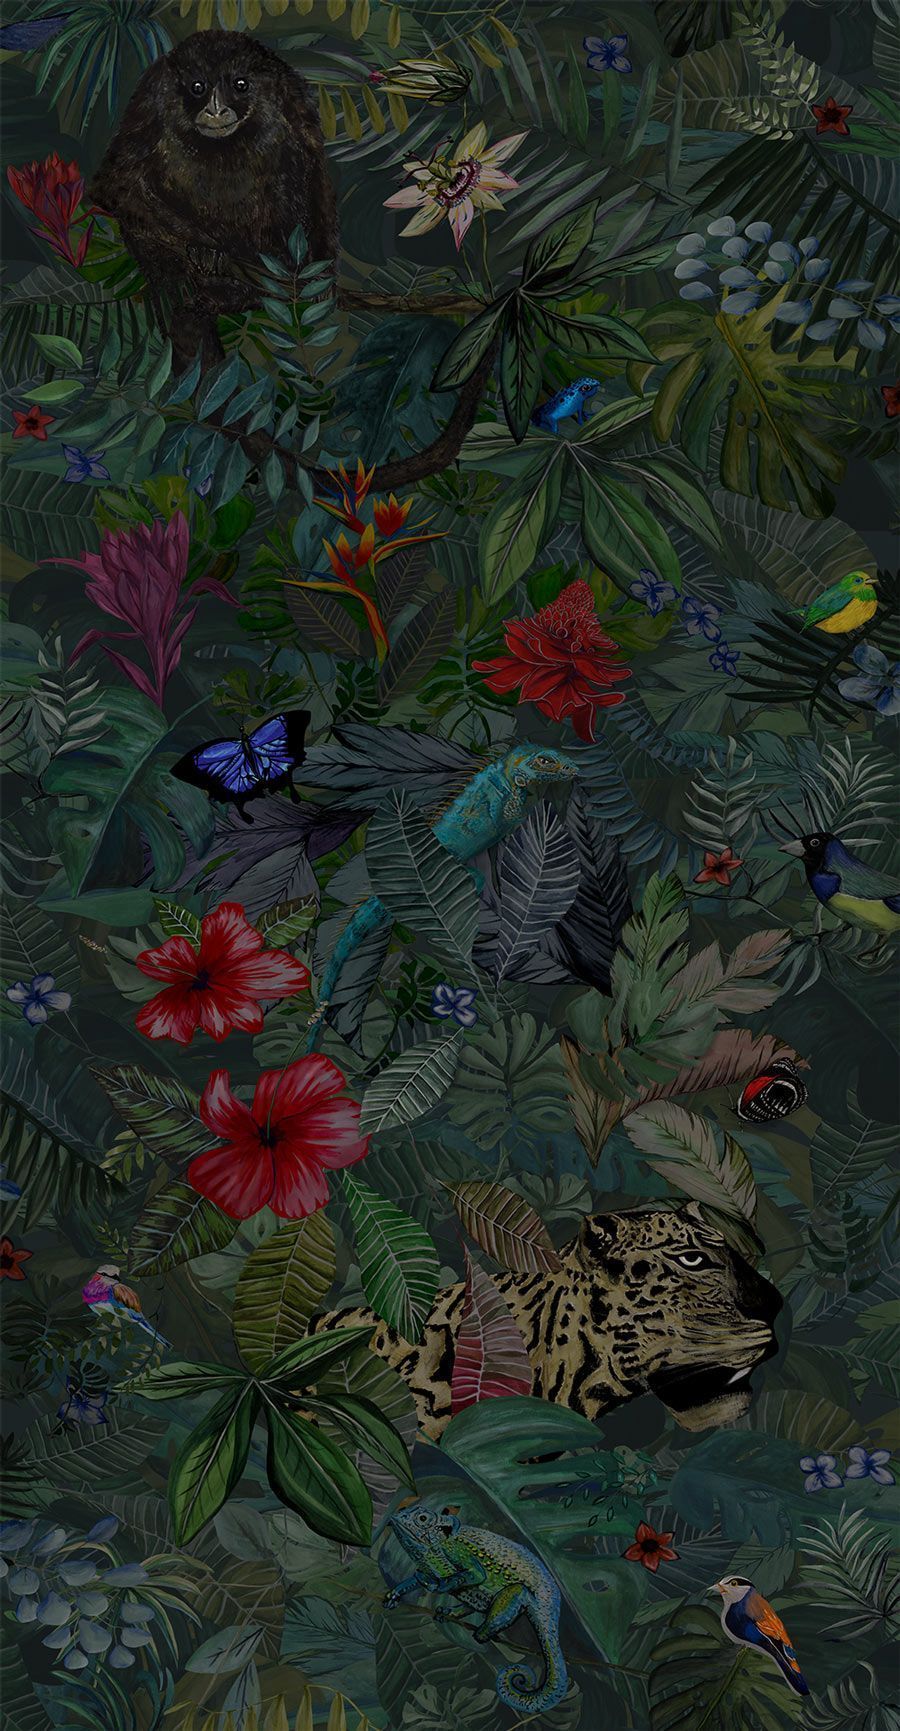 A painting of a lush tropical rainforest with a variety of animals and plants. - Jungle